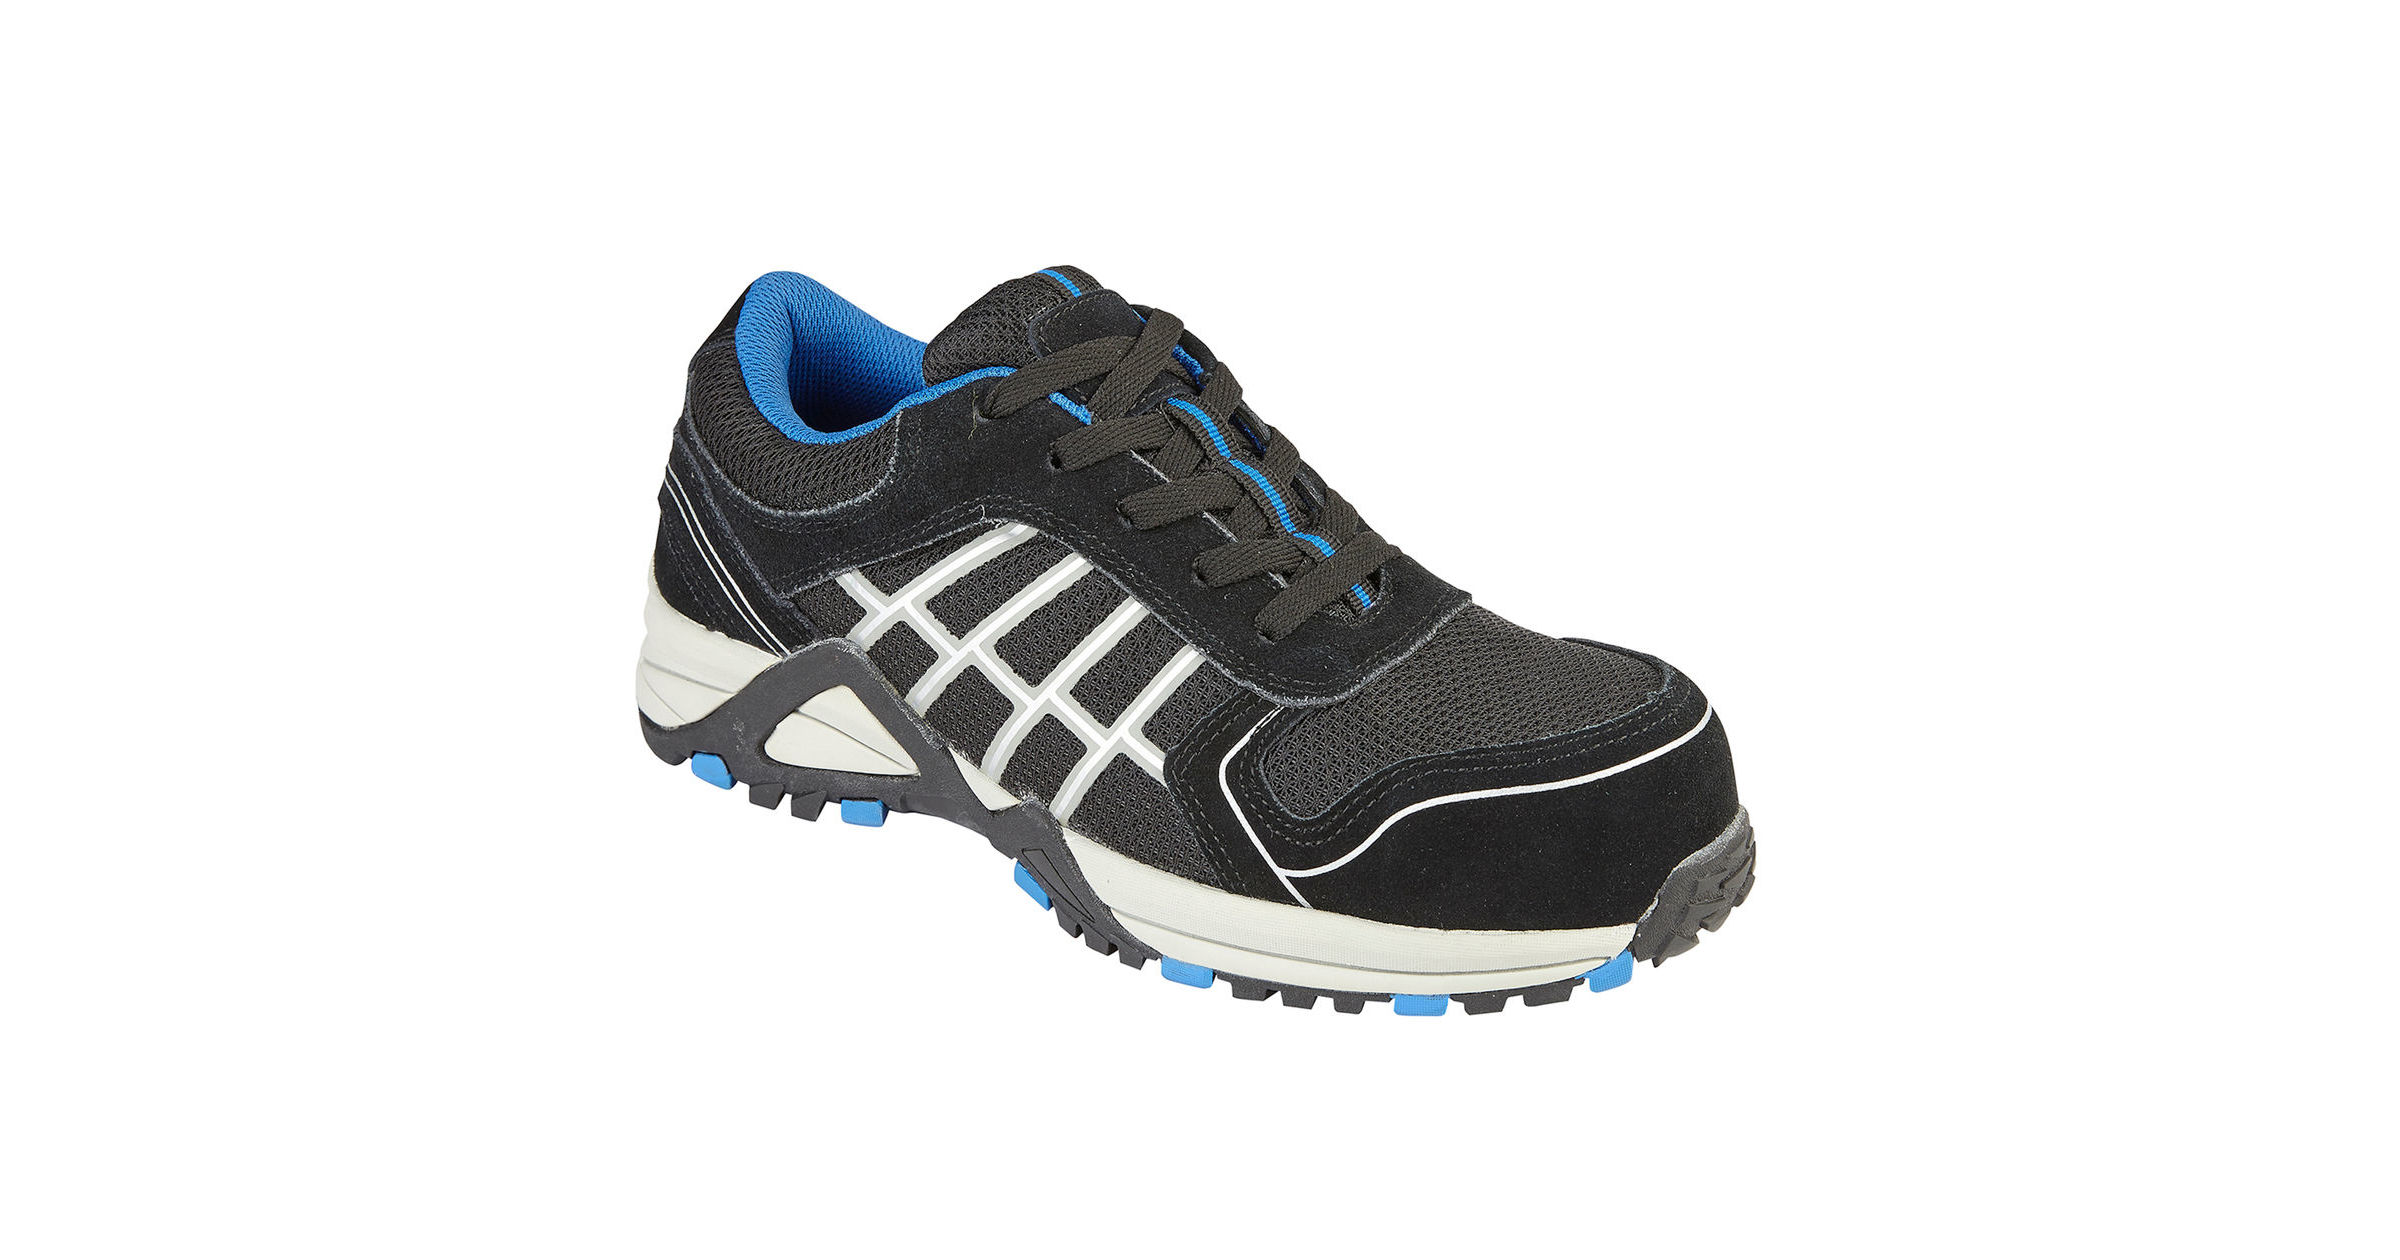 HIMALAYAN 3421 S1P blue/black metal-free composite safety trainer with midsole 